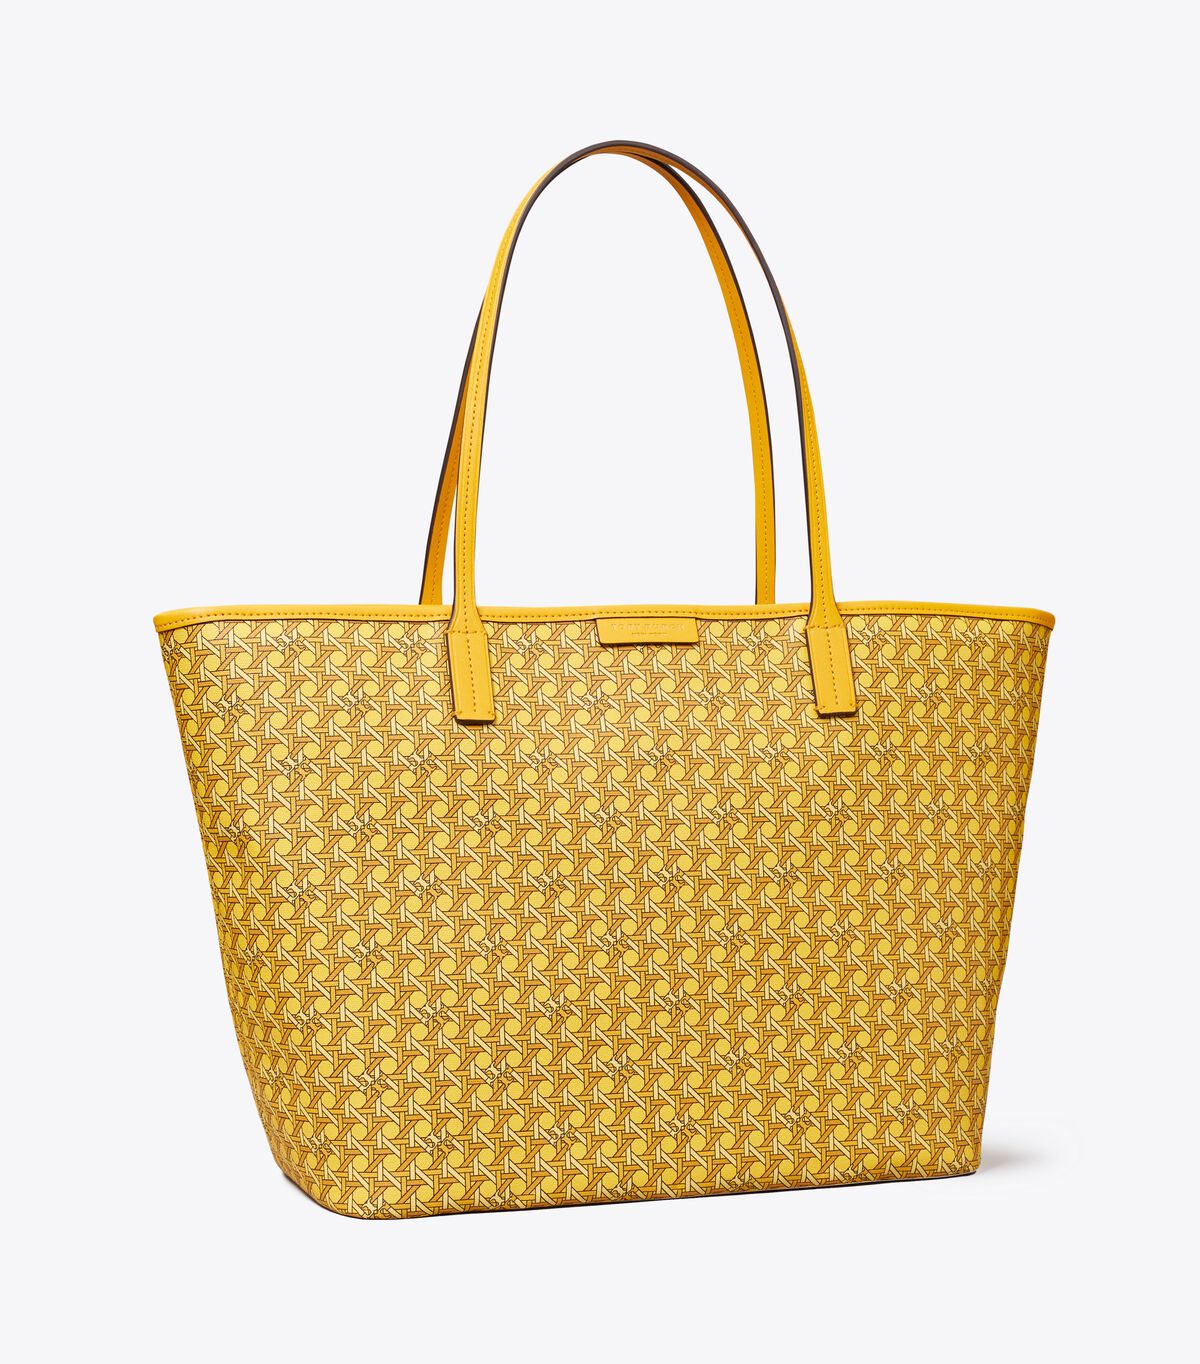 Orange Tory Burch Ever-ready Zip Women's Tote Bags | OUTLET-67314599